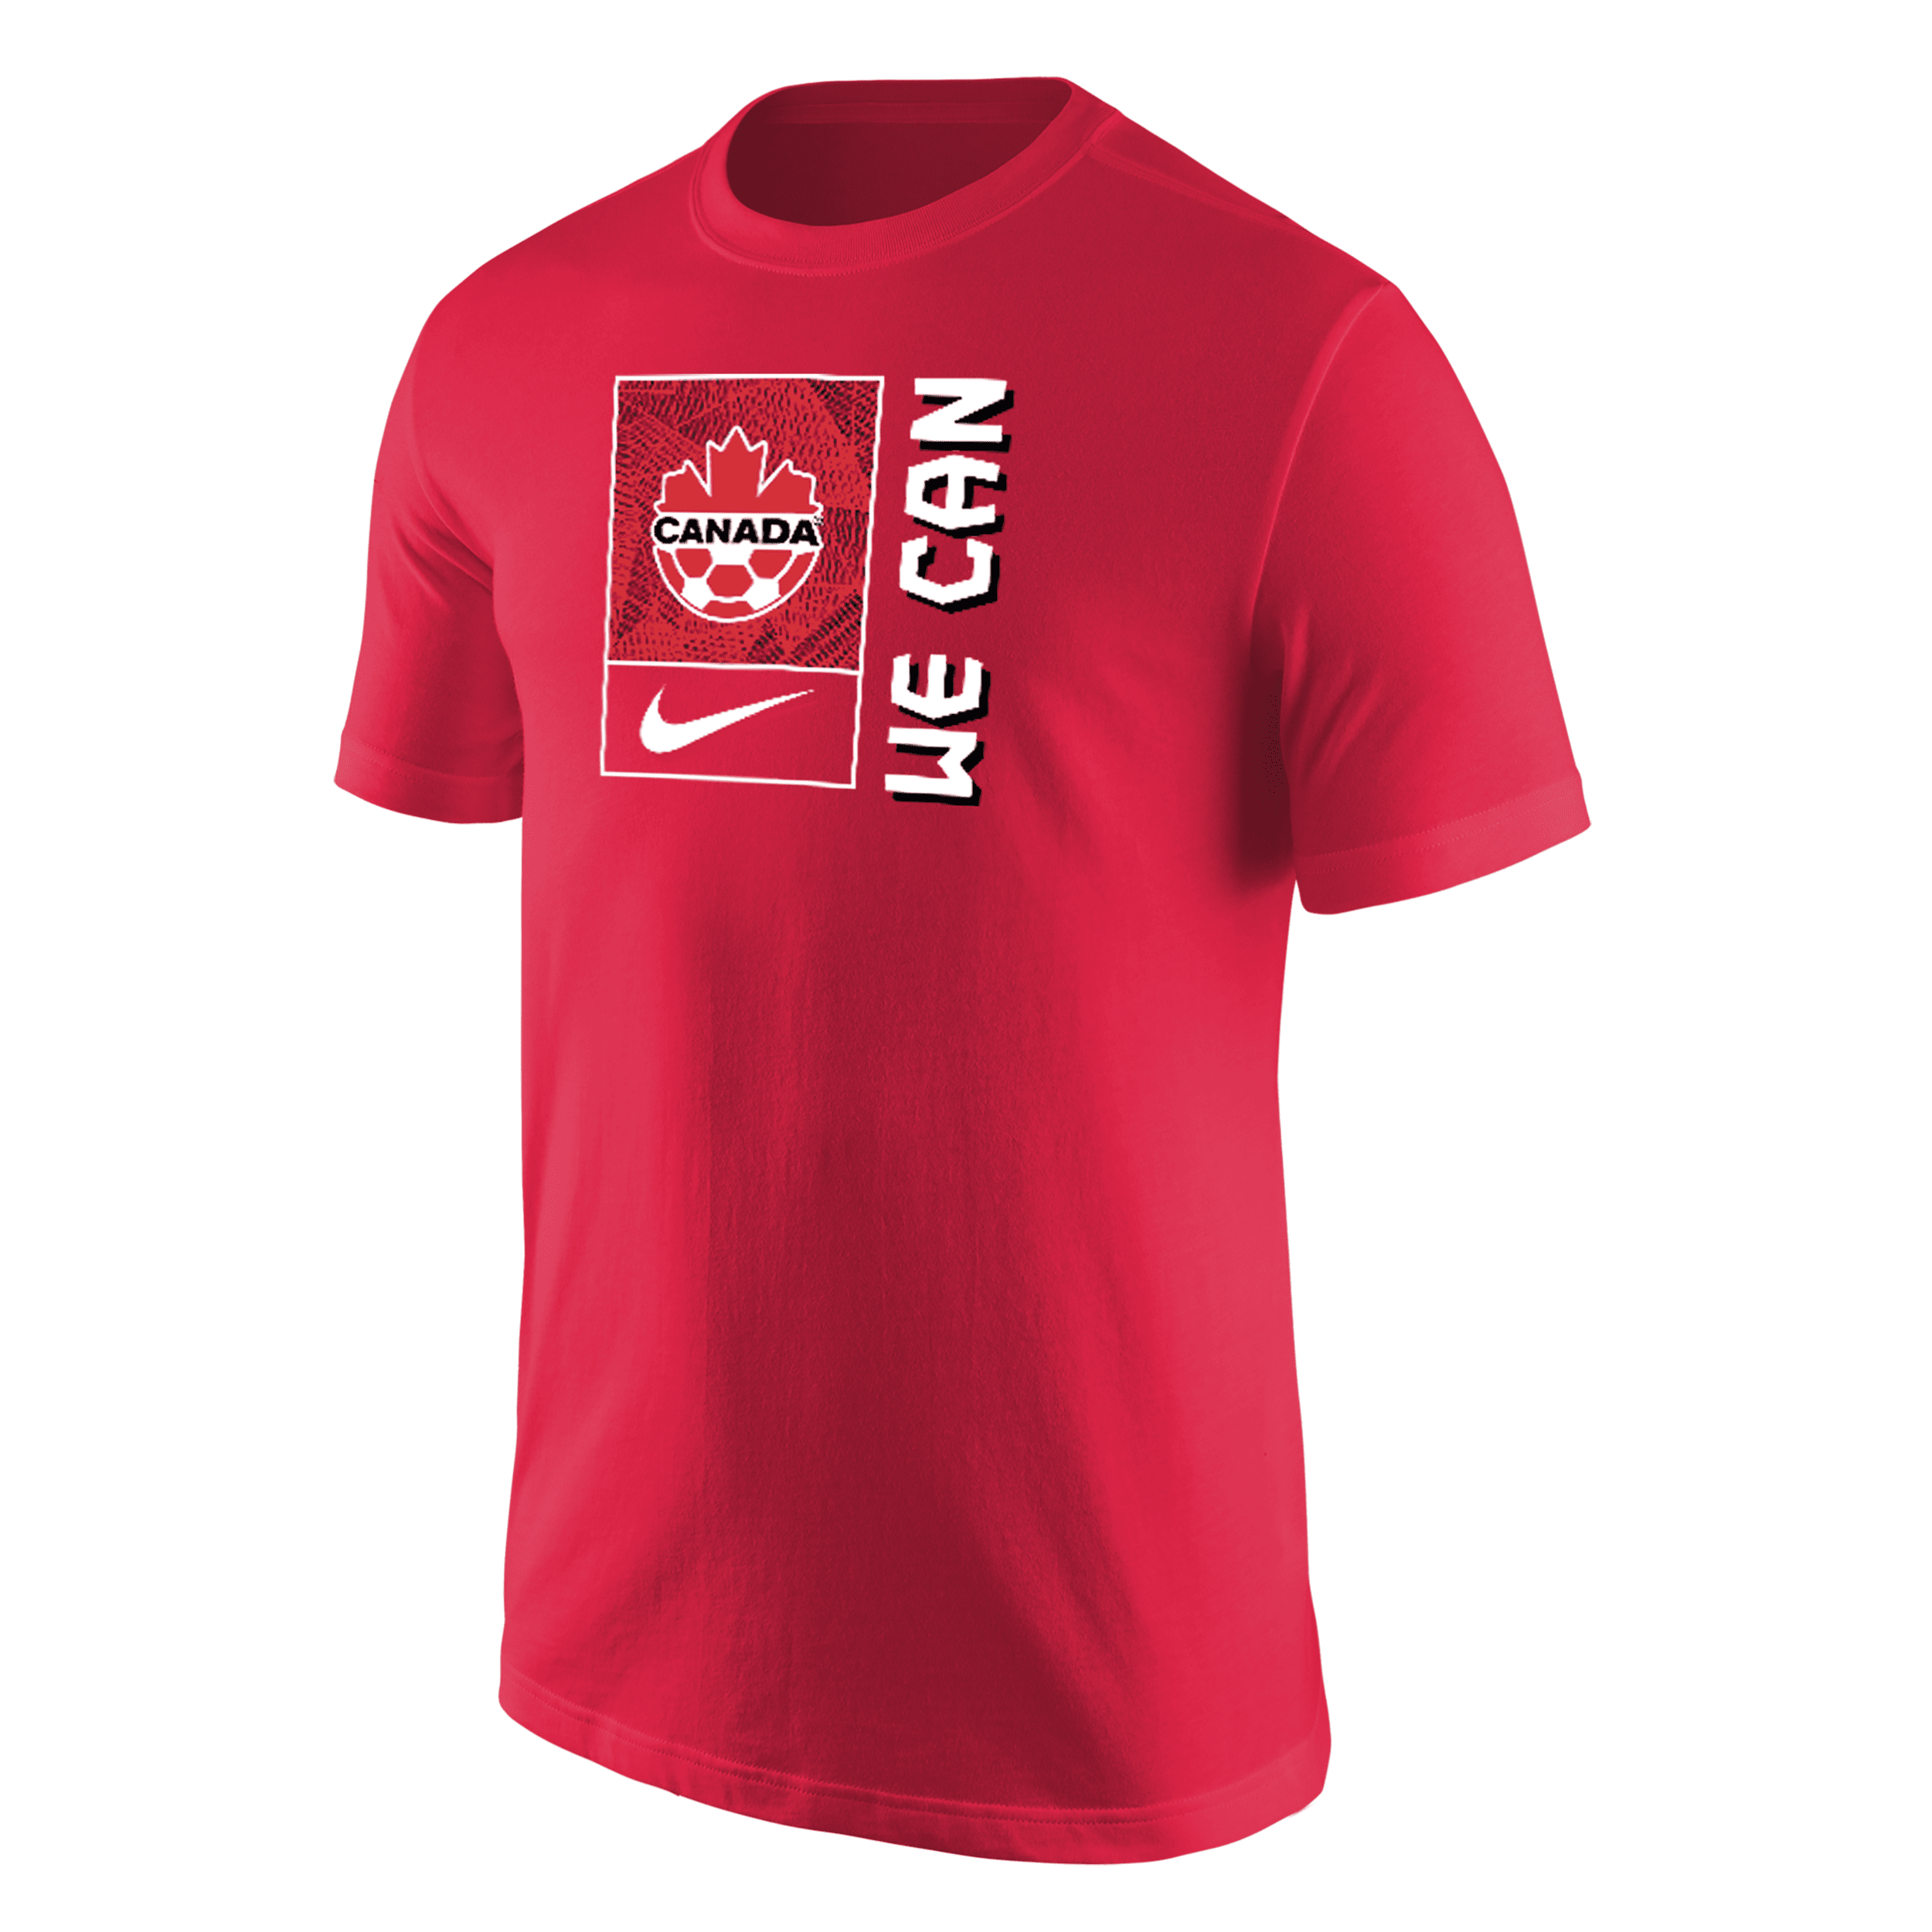 Nike Canada  Men's Soccer T-shirt In Red